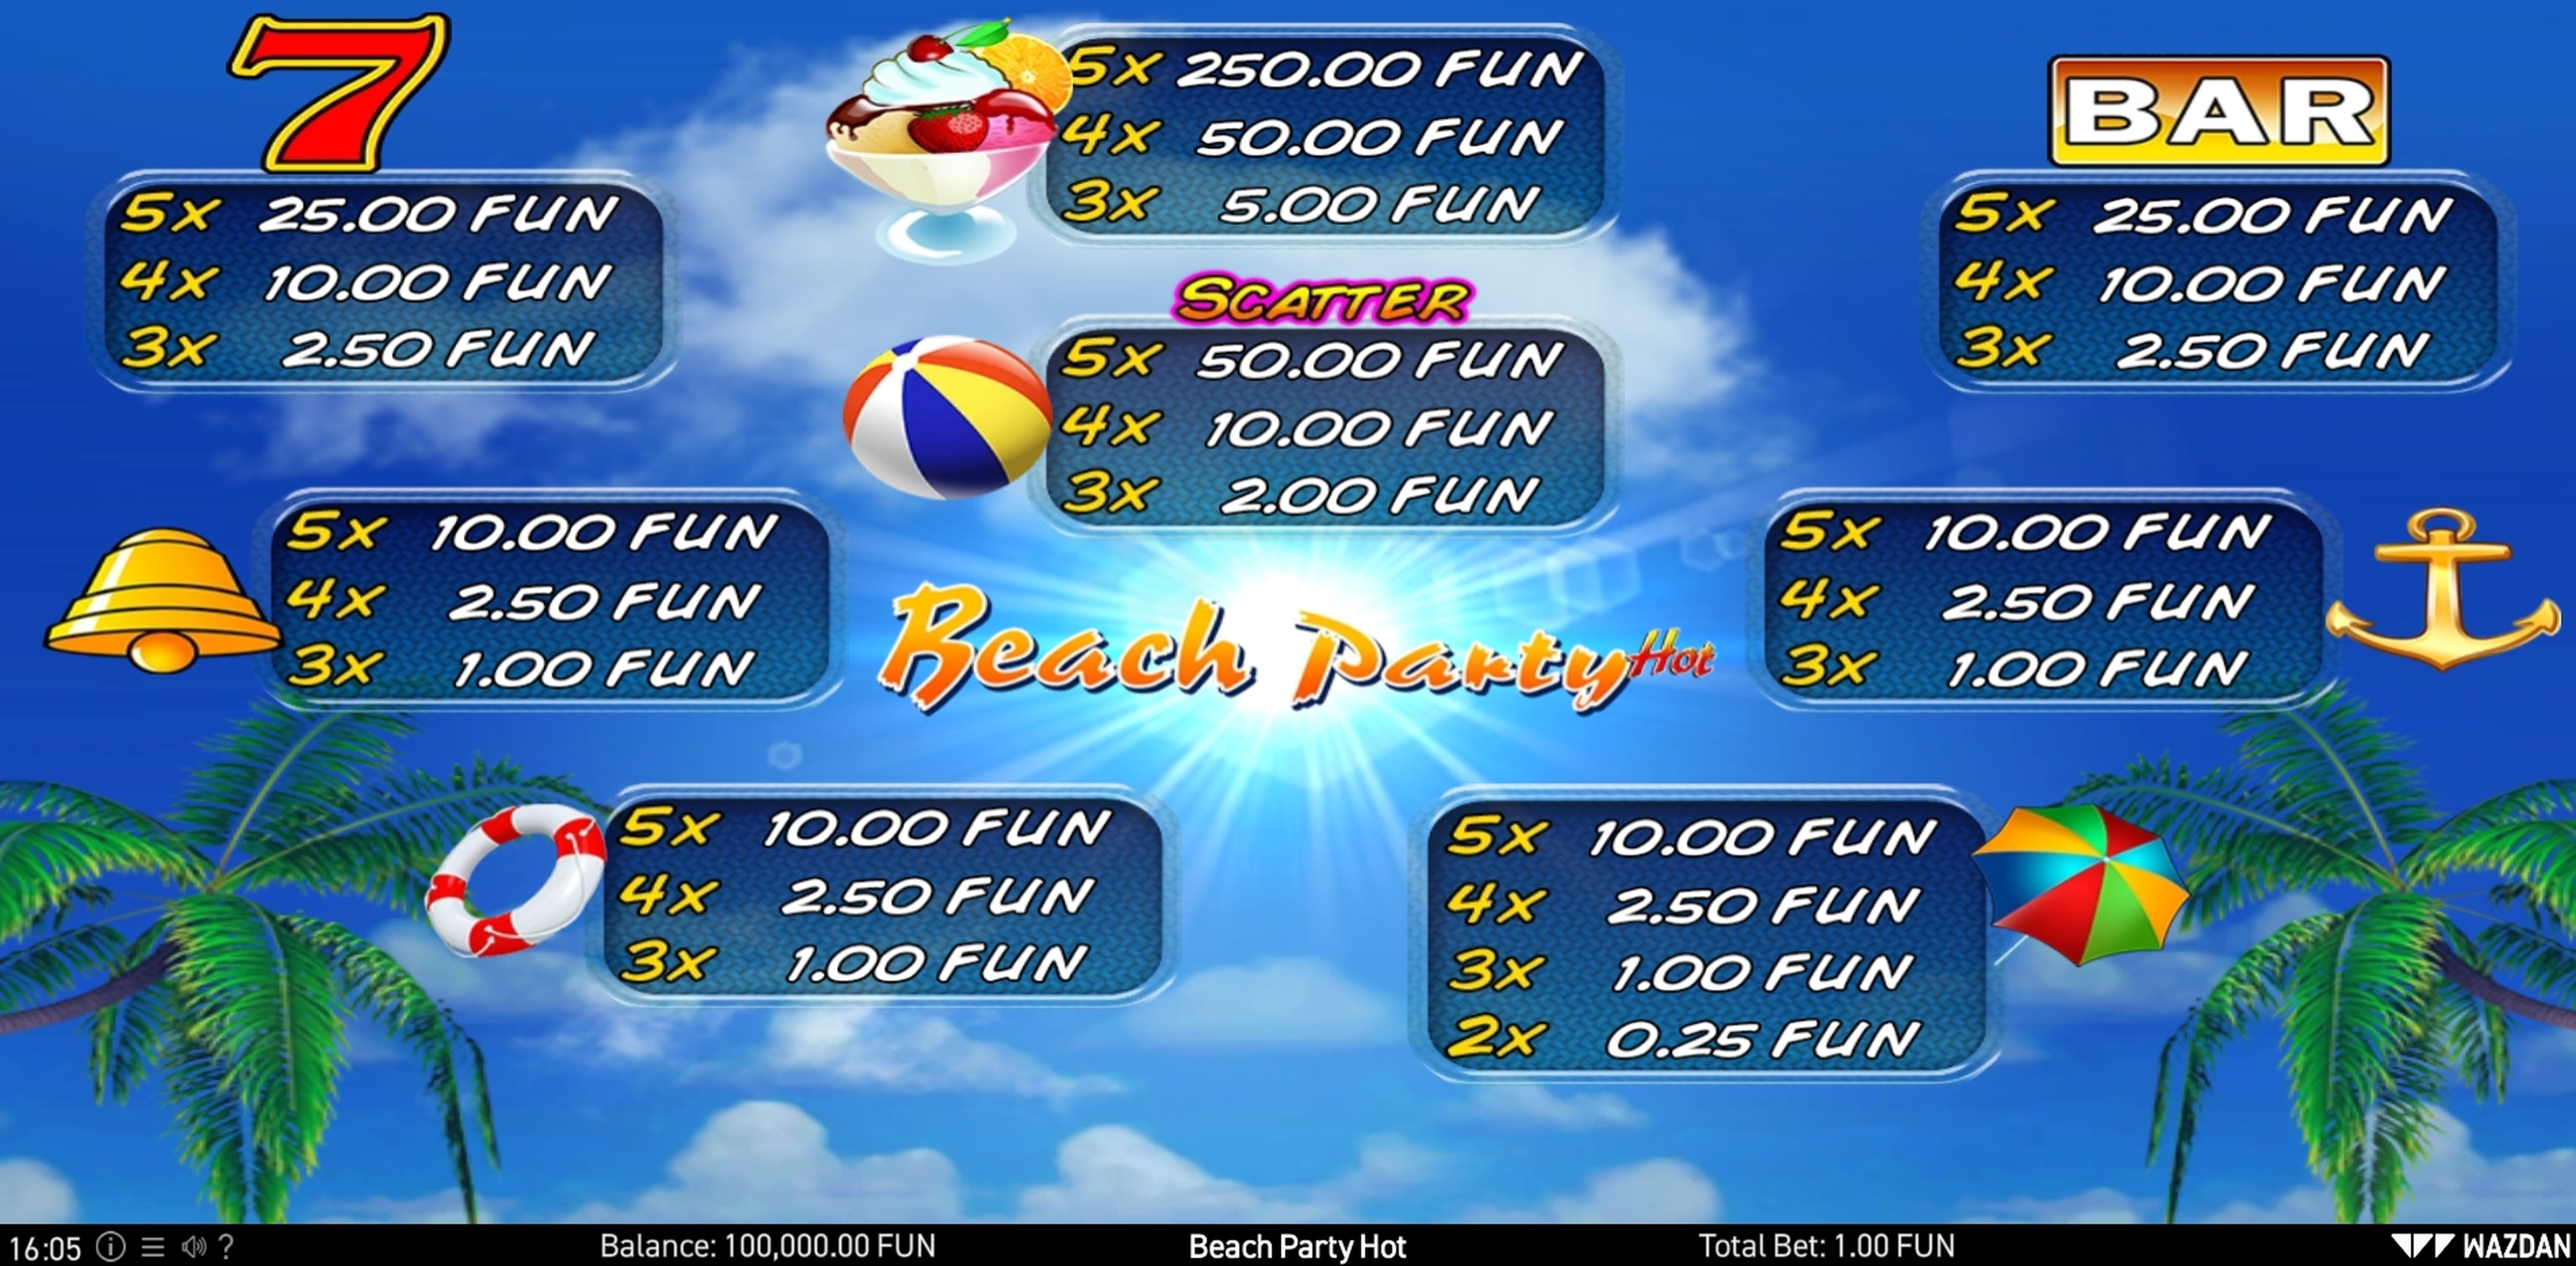 Info of Beach Party Hot Slot Game by Wazdan